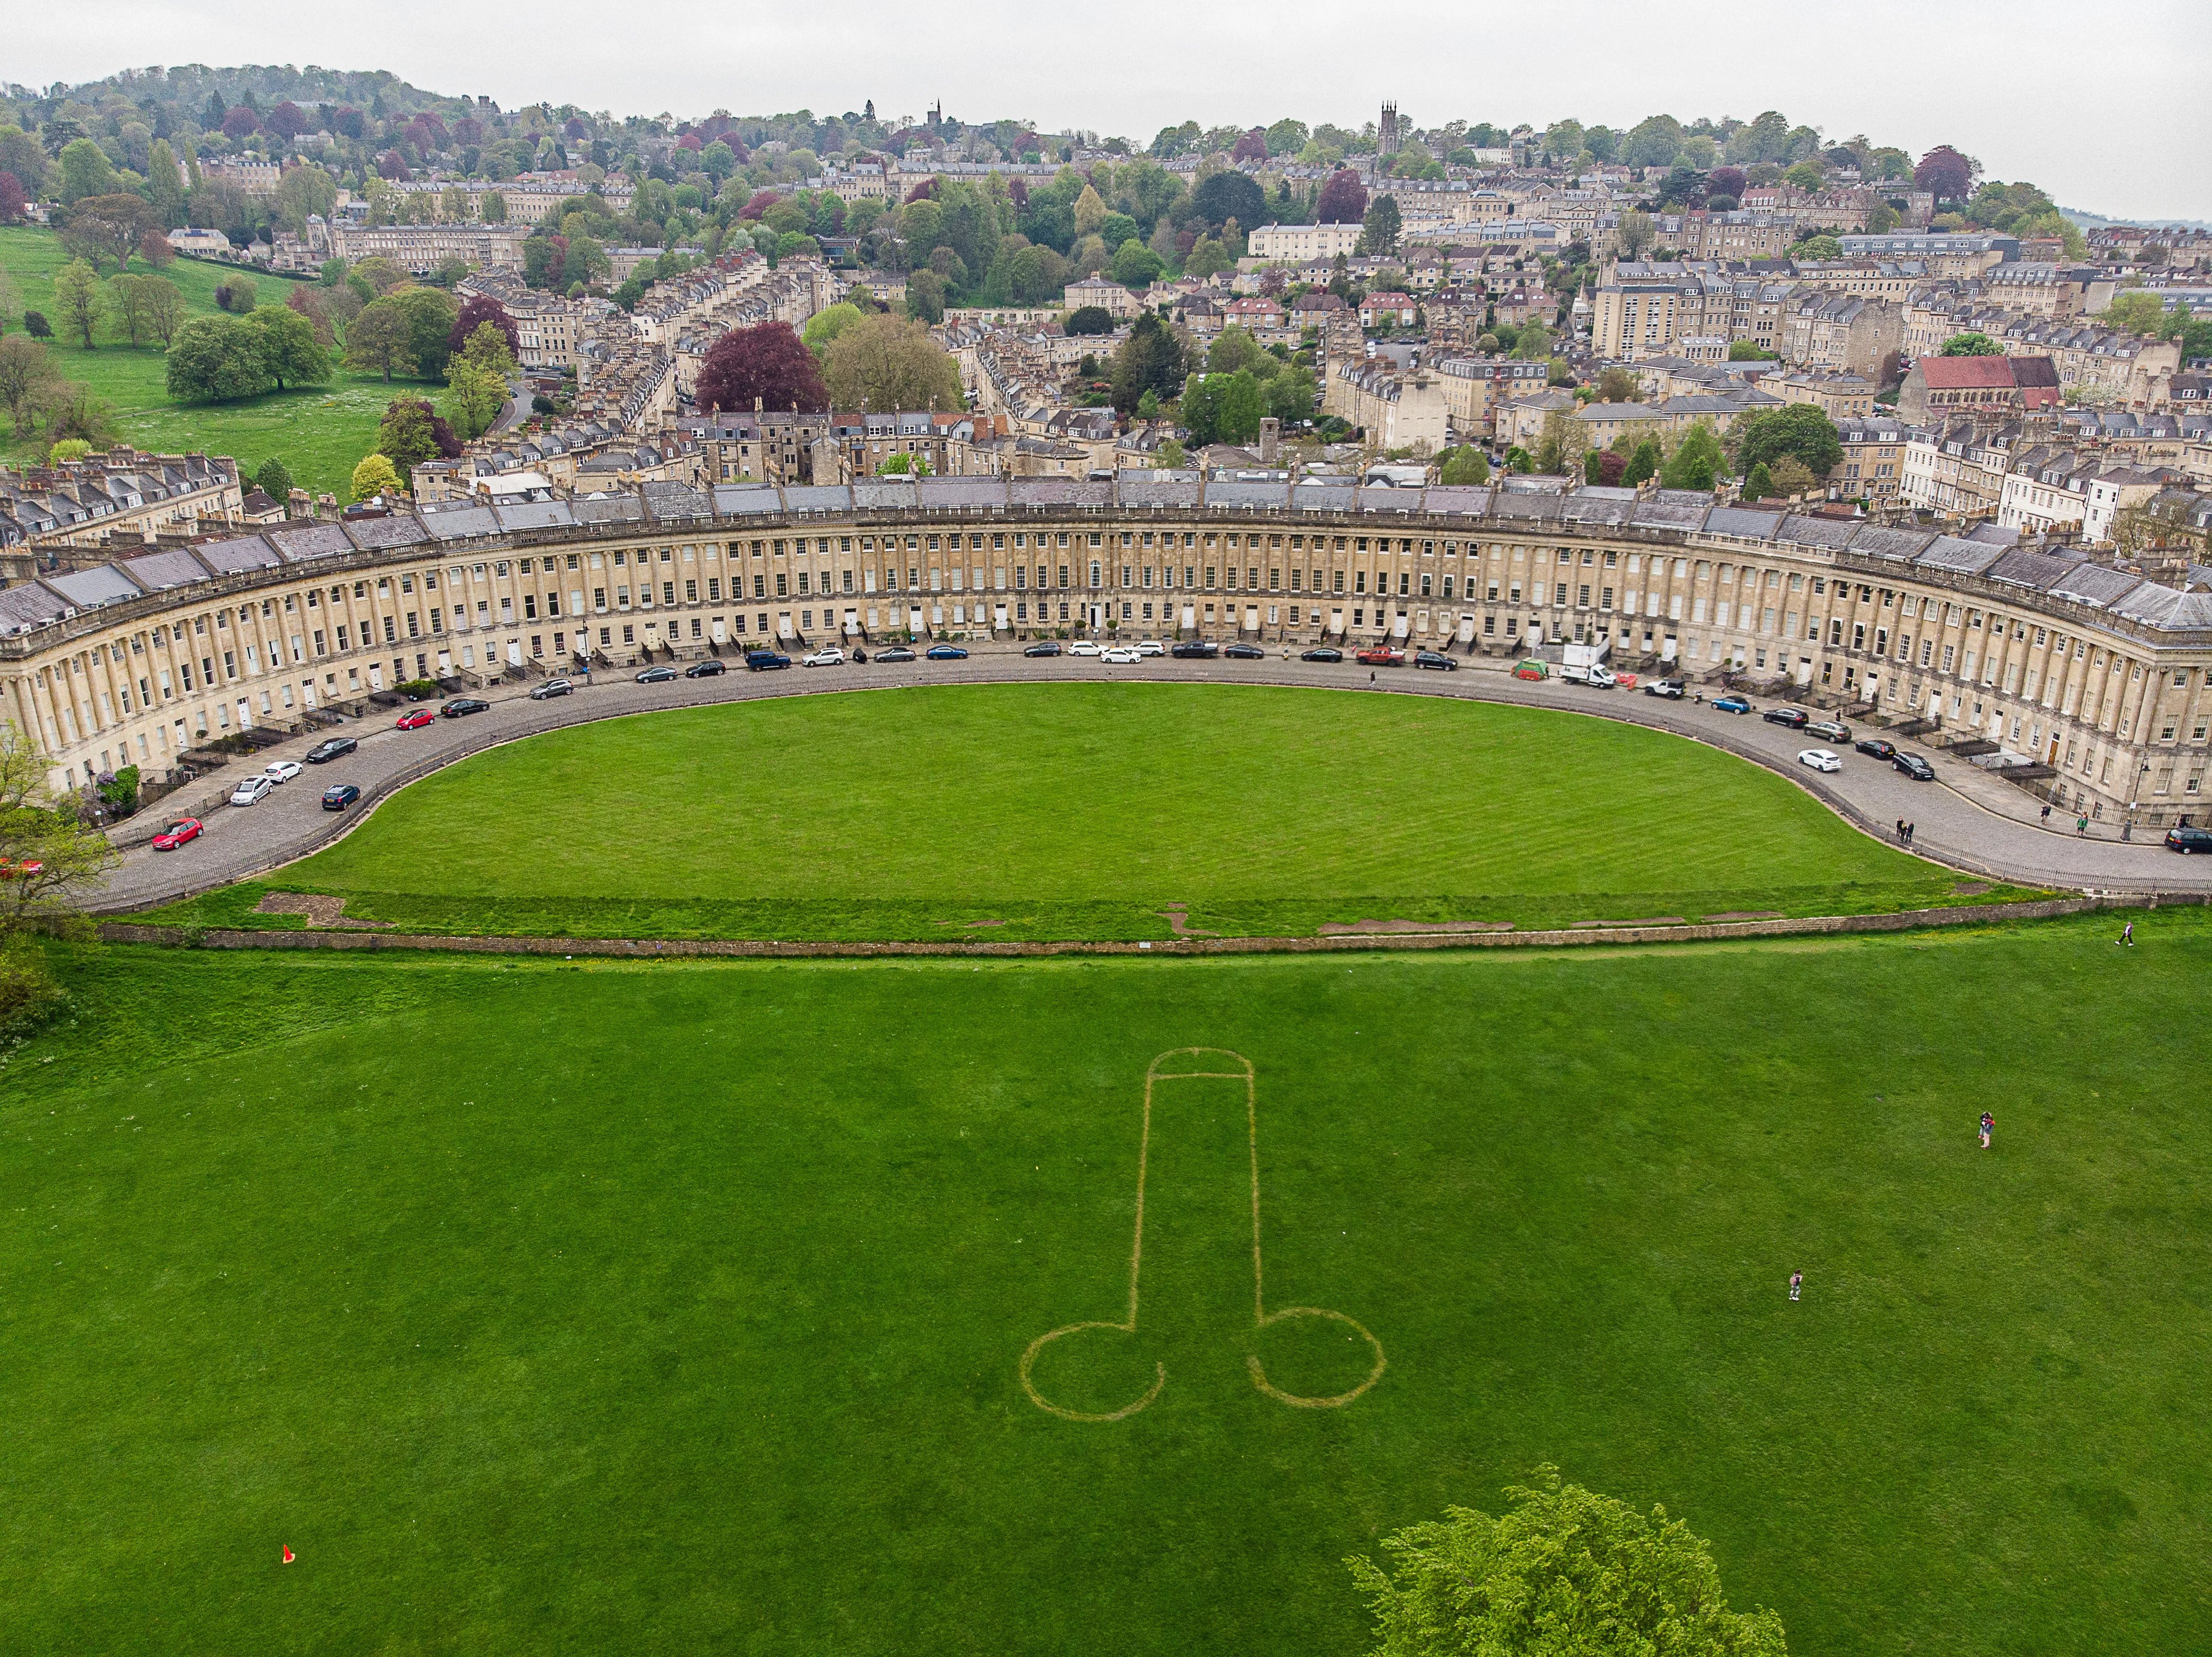 Giant penis at Royal Crescent Lawn